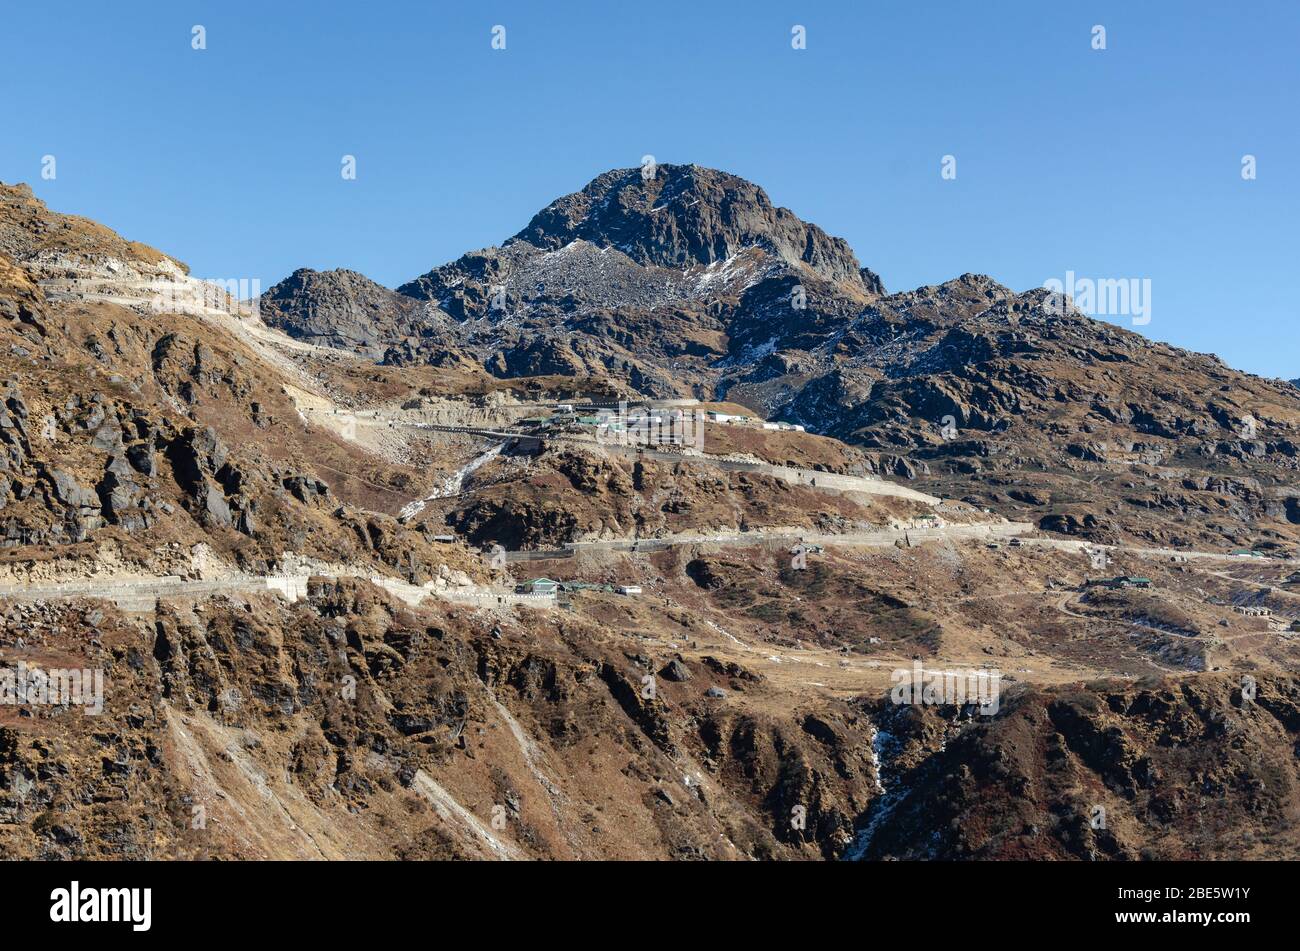 View of the dry barren Nathu La Mountain Pass landscape during December at Sikkim, India Stock Photo